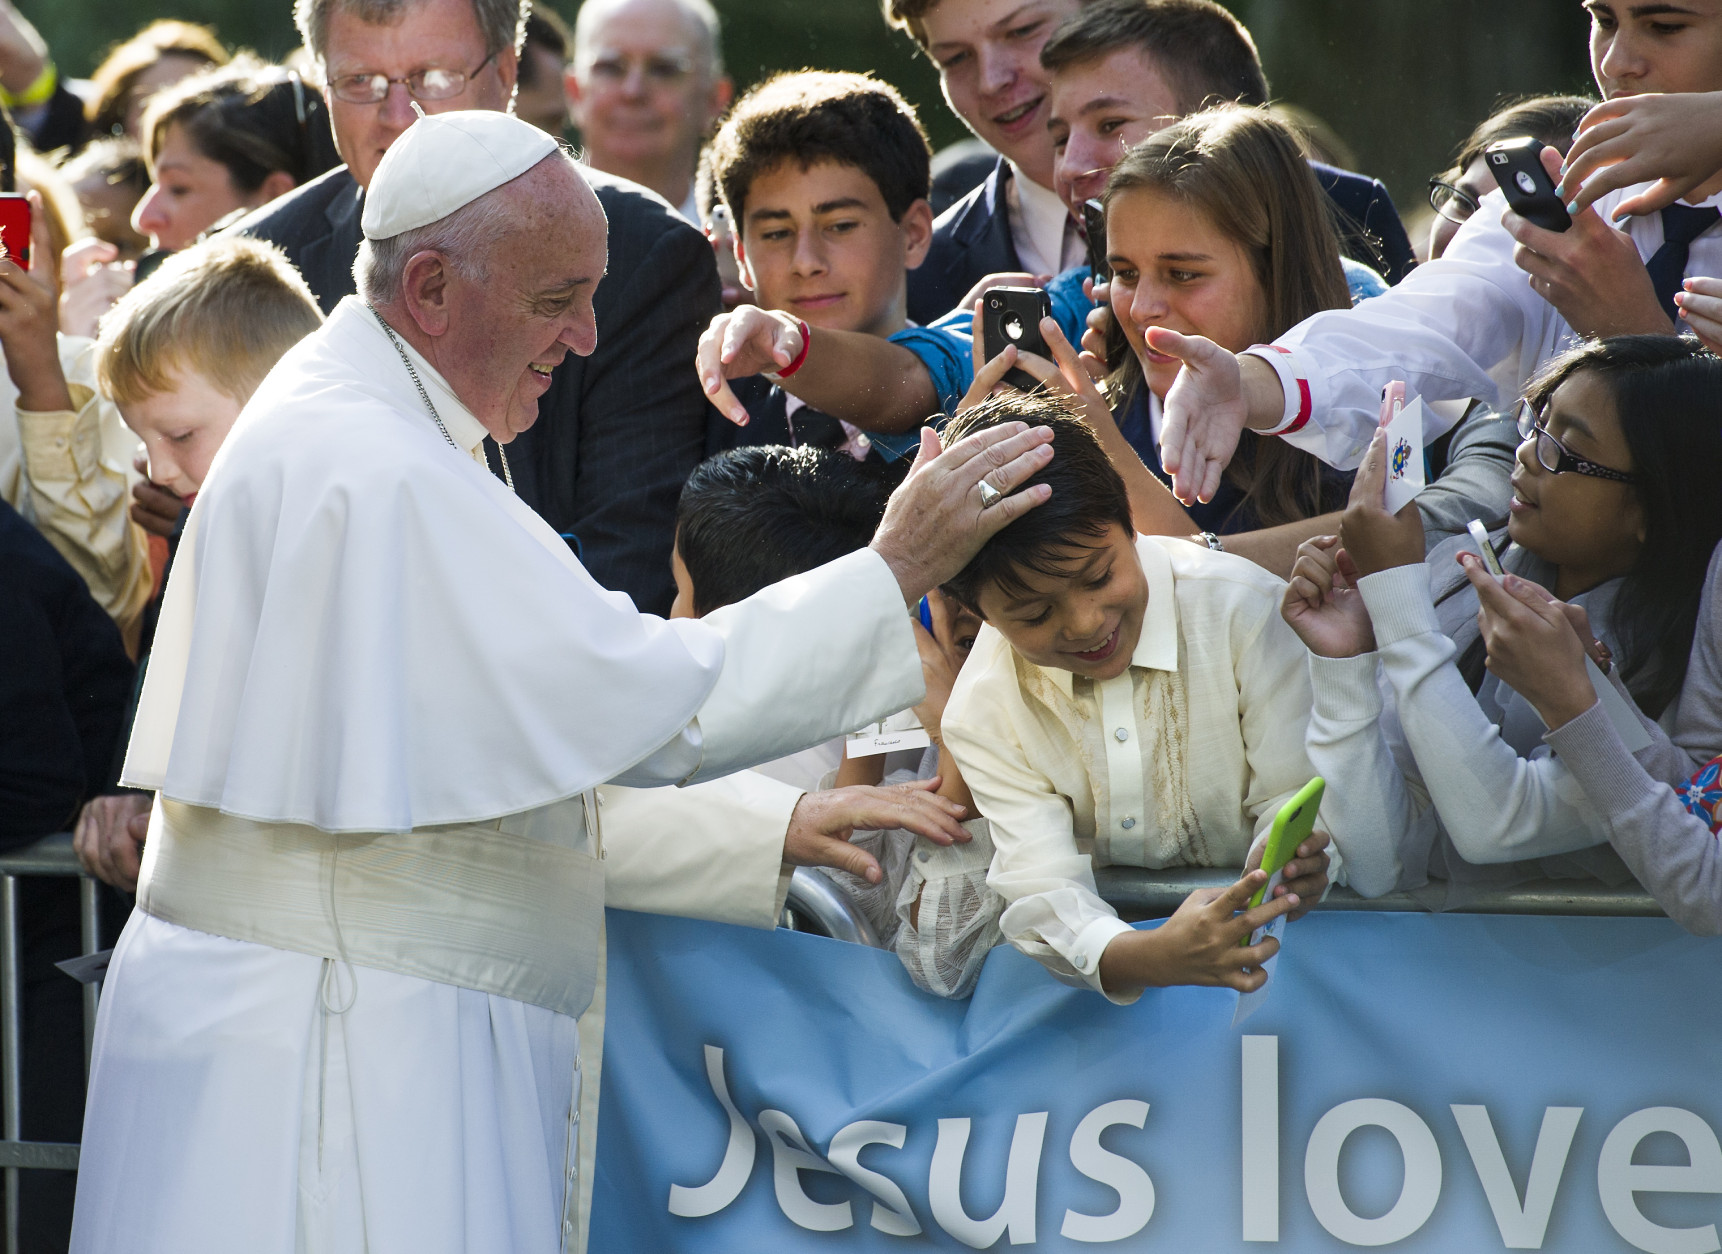 Pope Francis places his hand atop a young boys head while the boy takes a selfie before the Pope departs the Apostolic Nunciature, the Vatican's diplomatic mission in the heart of Washington, en route to the Capitol to address a joint meeting of Congress Thursday, Sept. 24, 2015.  (AP Photo/Cliff Owen)